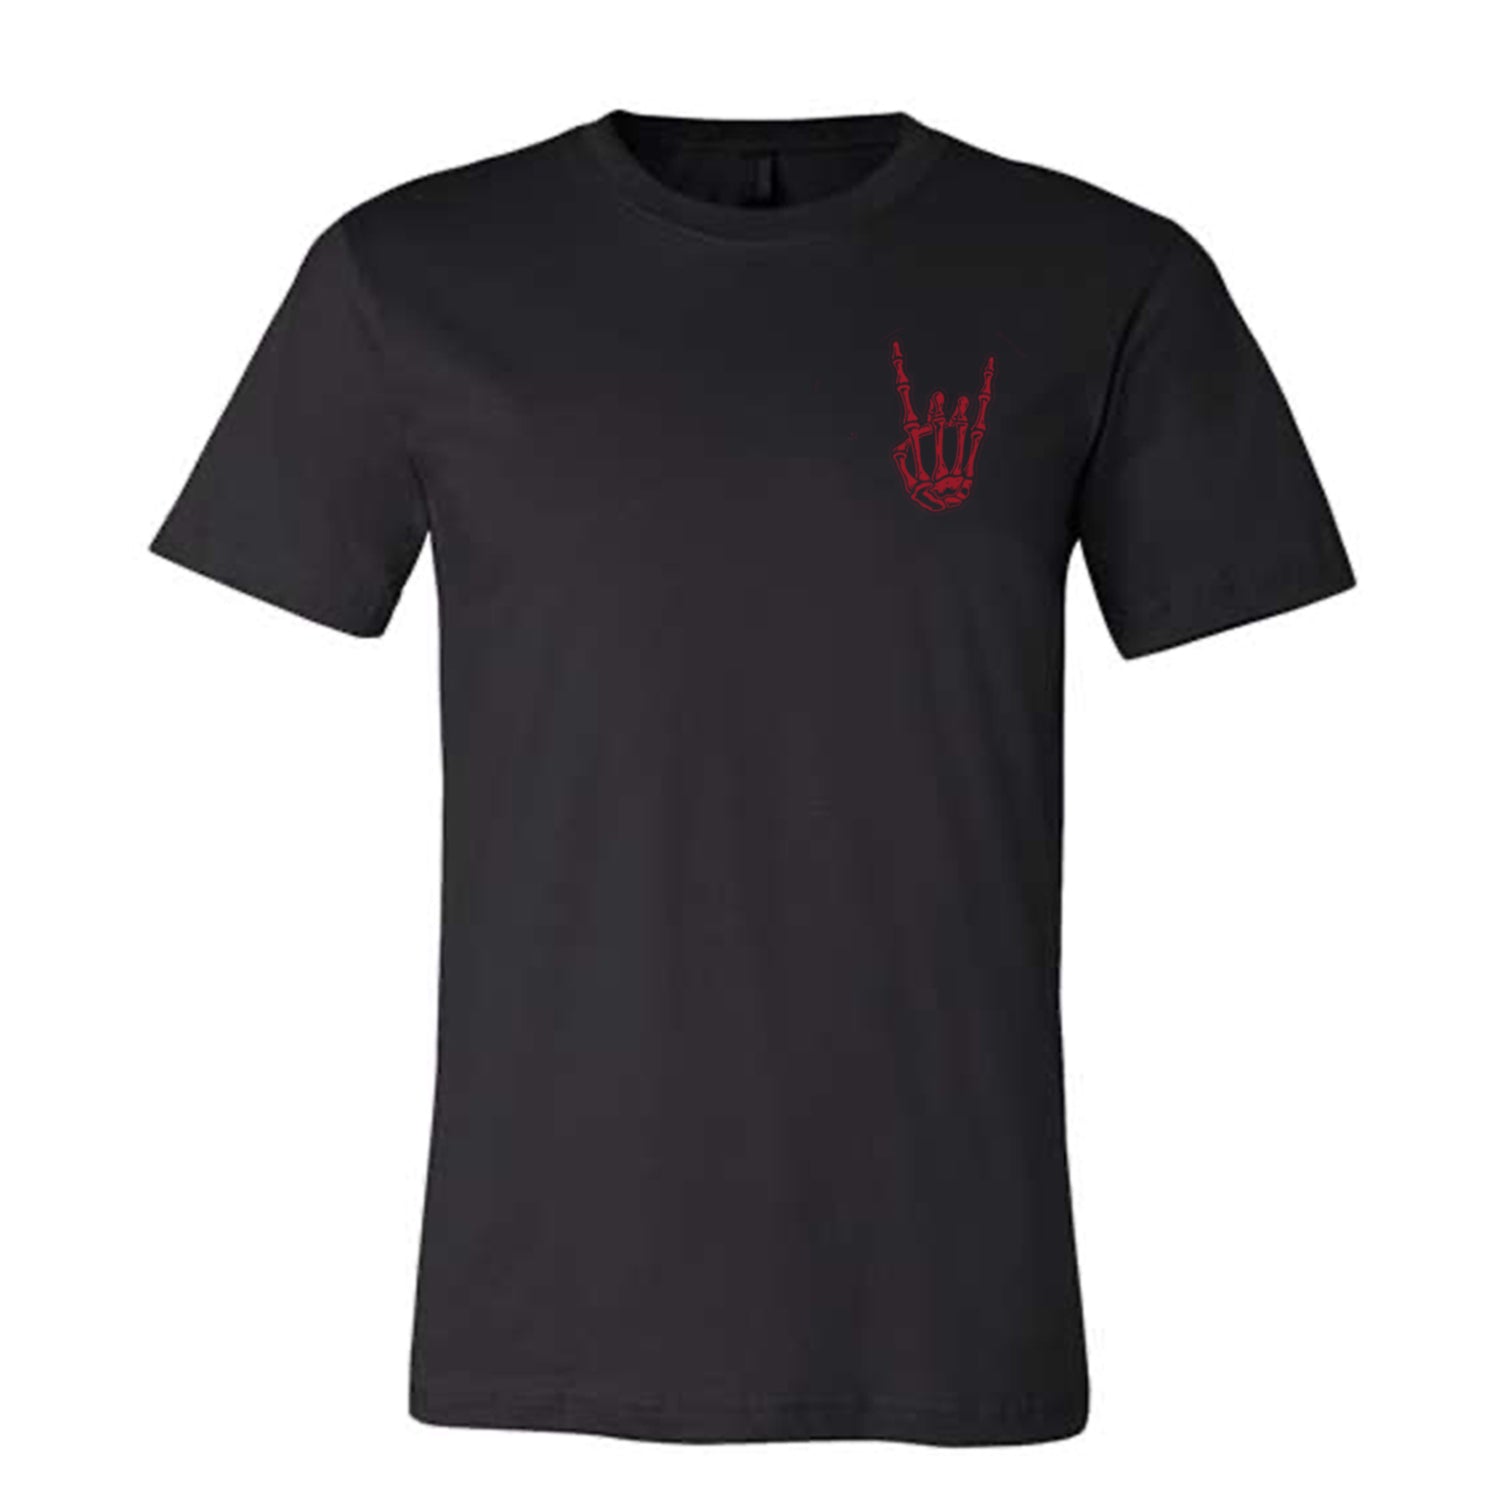 HoggLife Tee - Black/Red